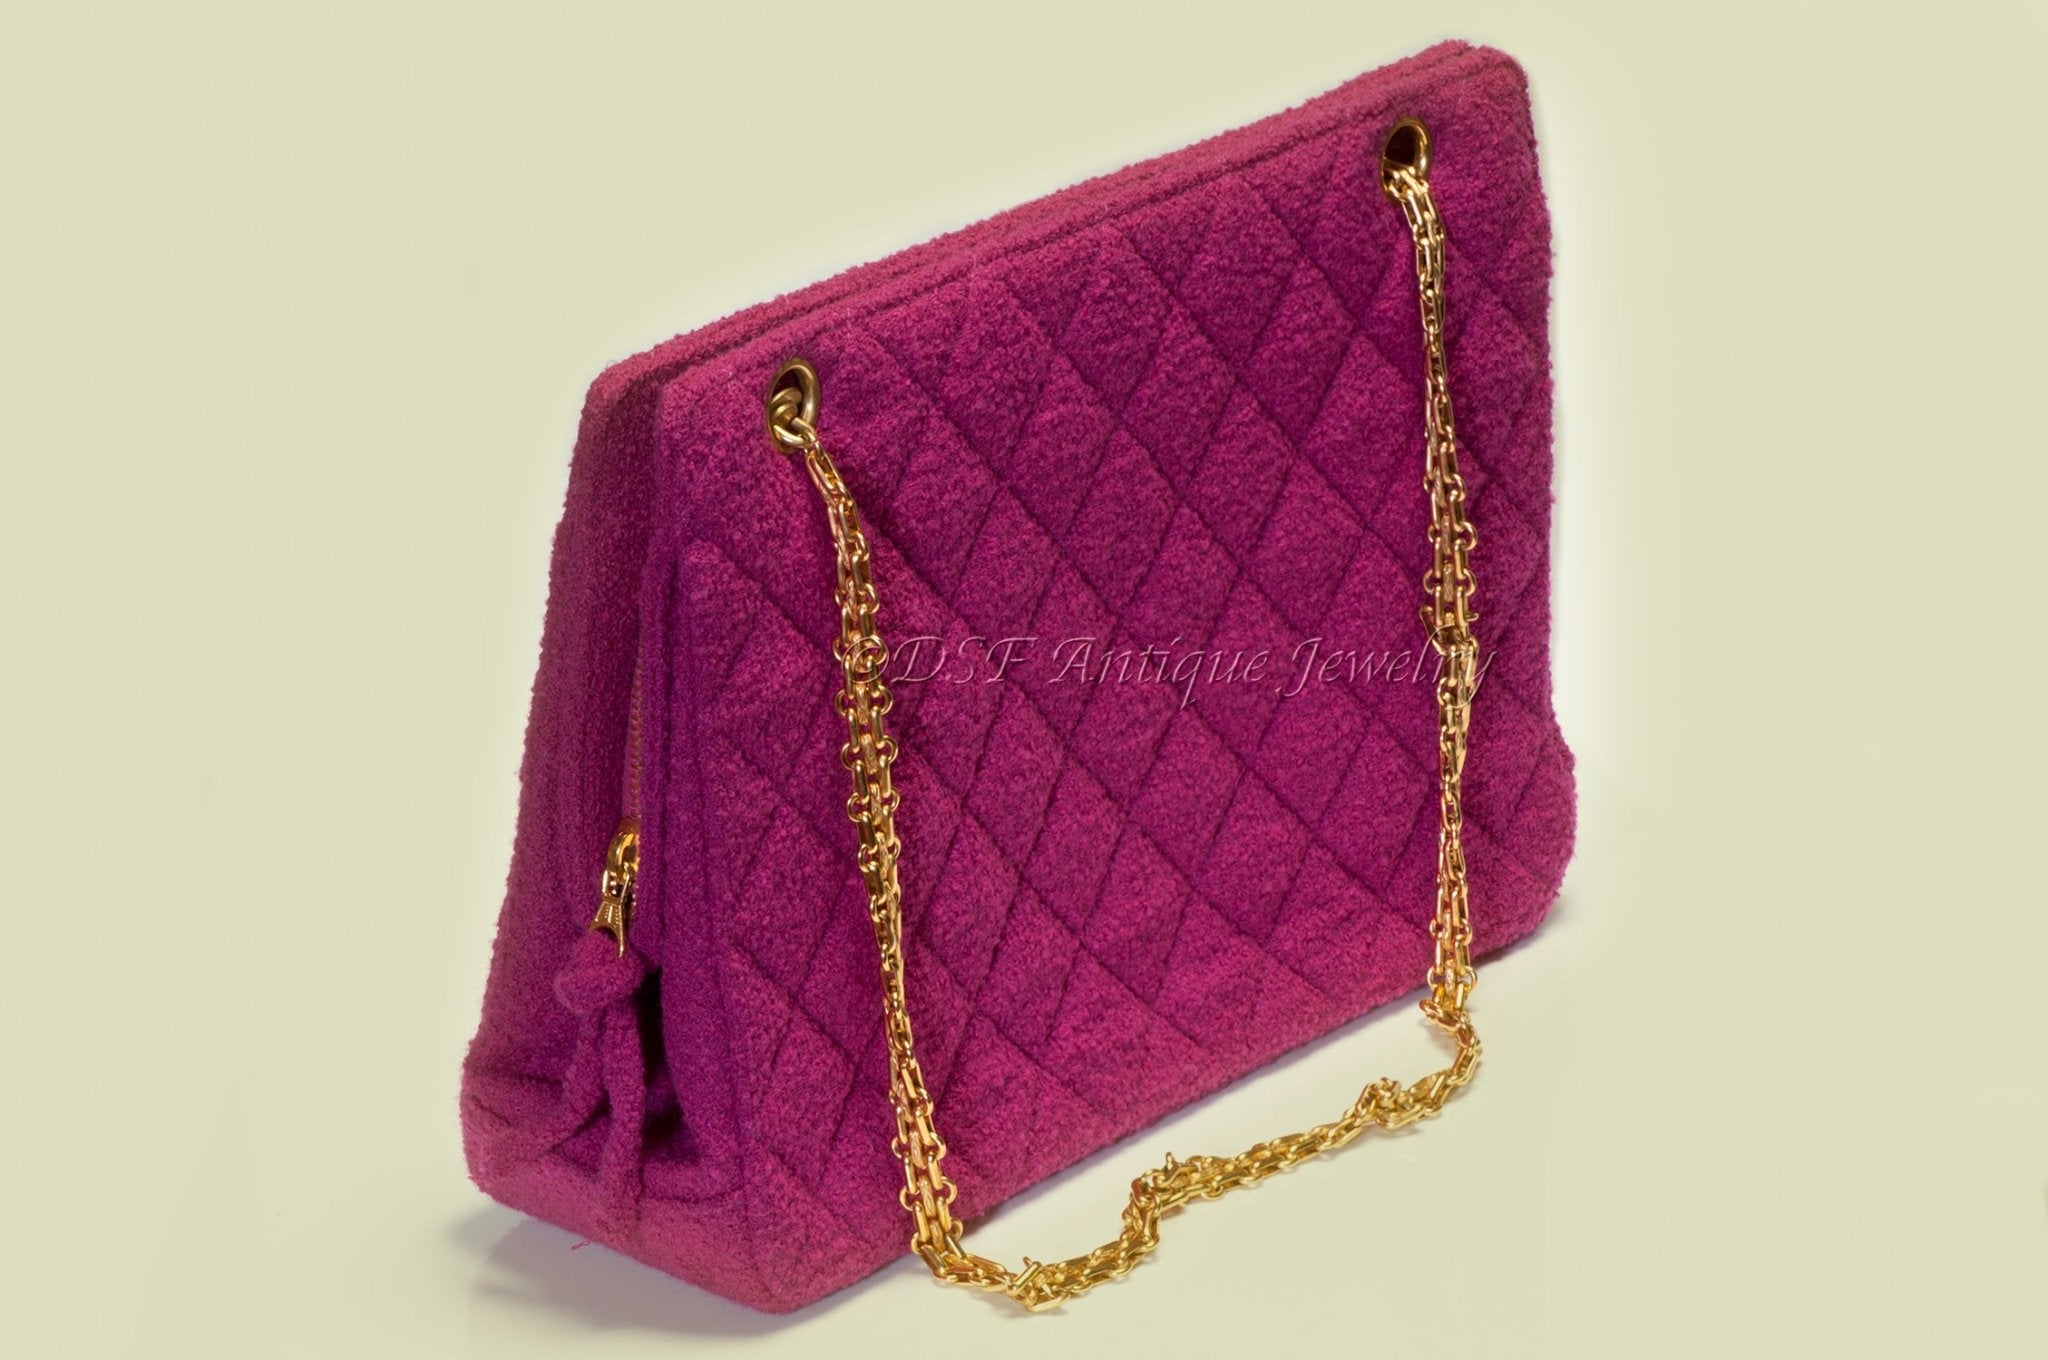 The Classy Chanel Bag From "Emily in Paris" - DSF Antique Jewelry